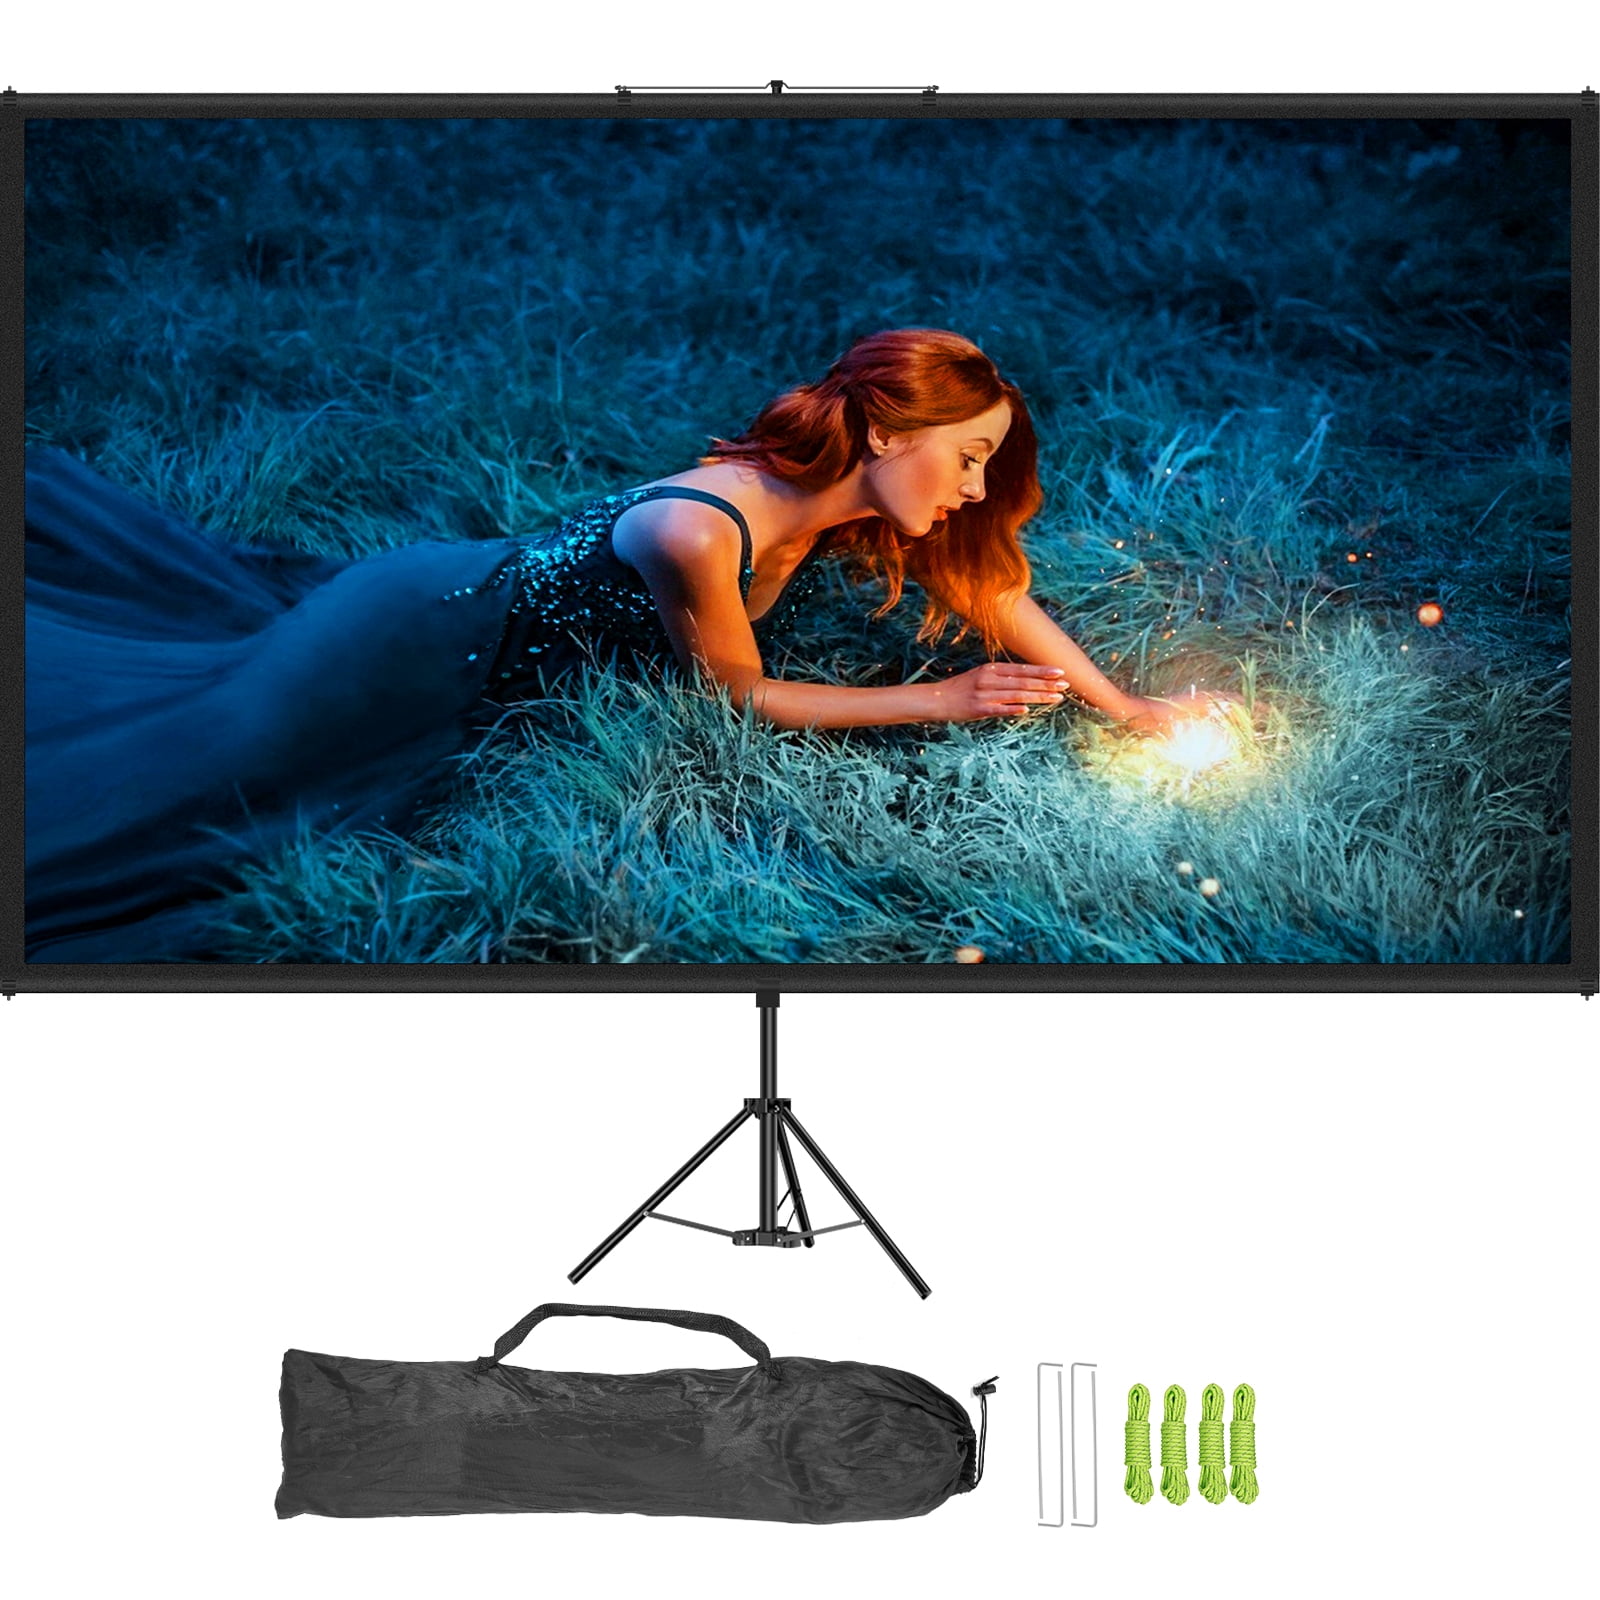 Details about   100In.Tripod Projection Screen 16:9 Square Projector Stand Home Office Video USA 